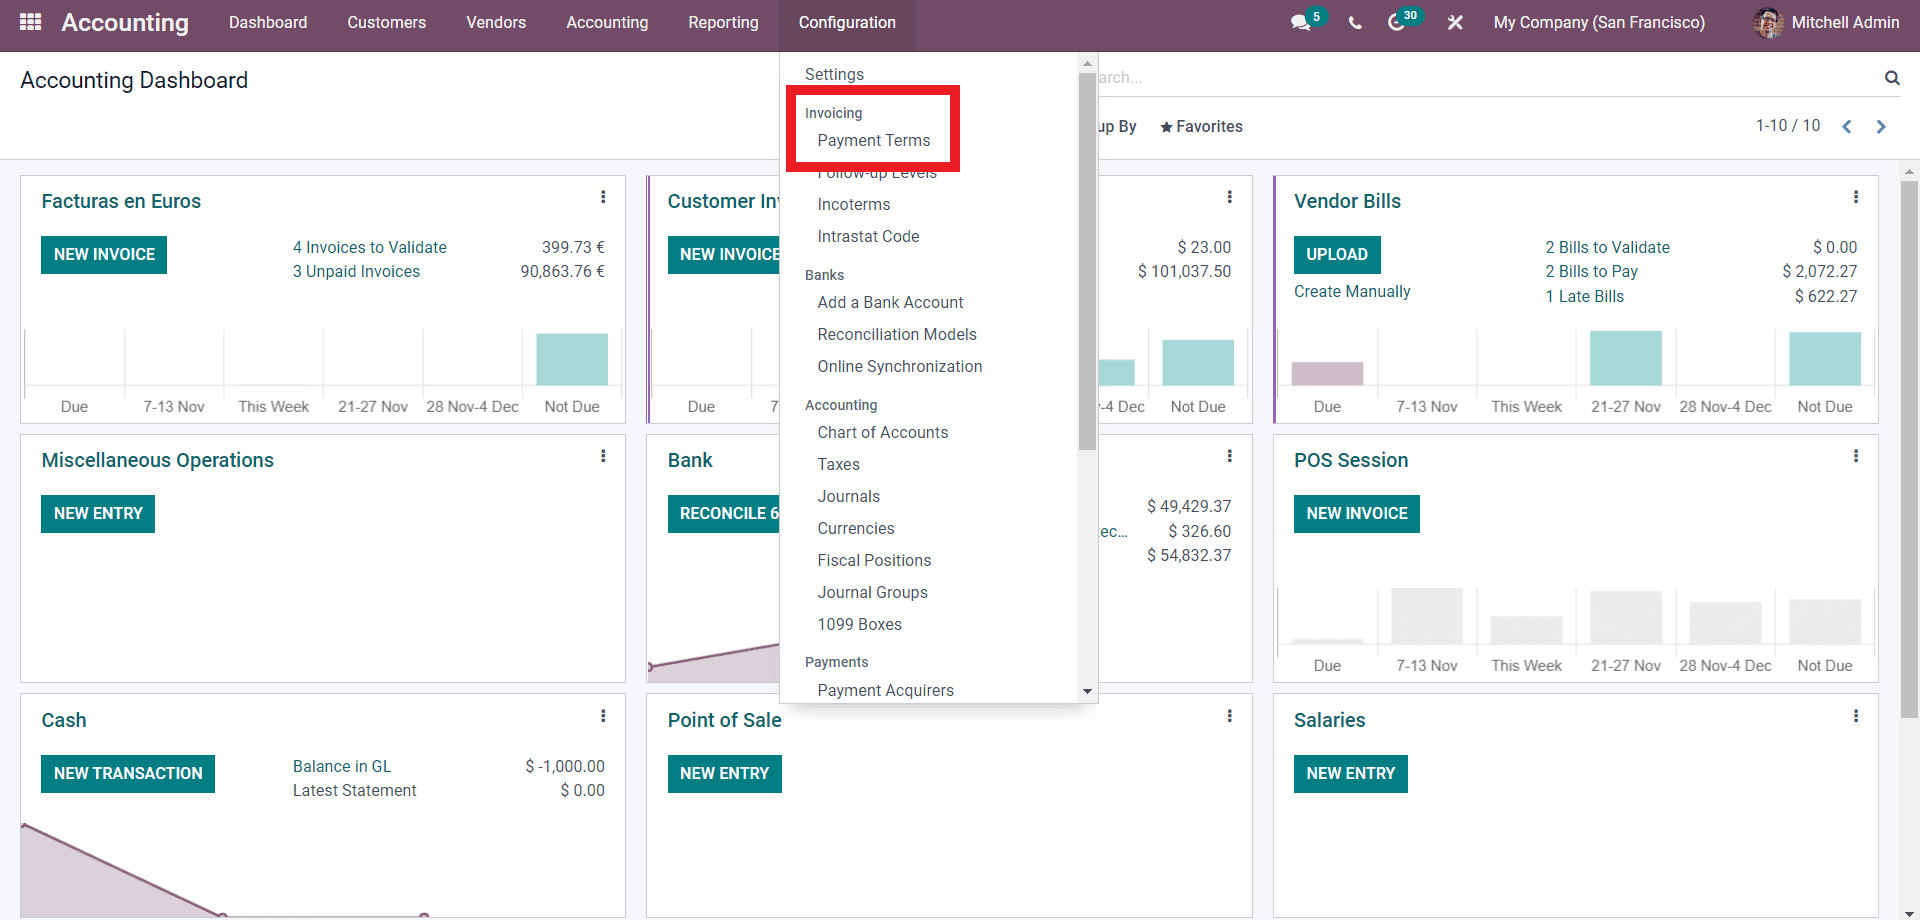 how-to-manage-invoices-efficiently-with-odoo-15-cybrosys